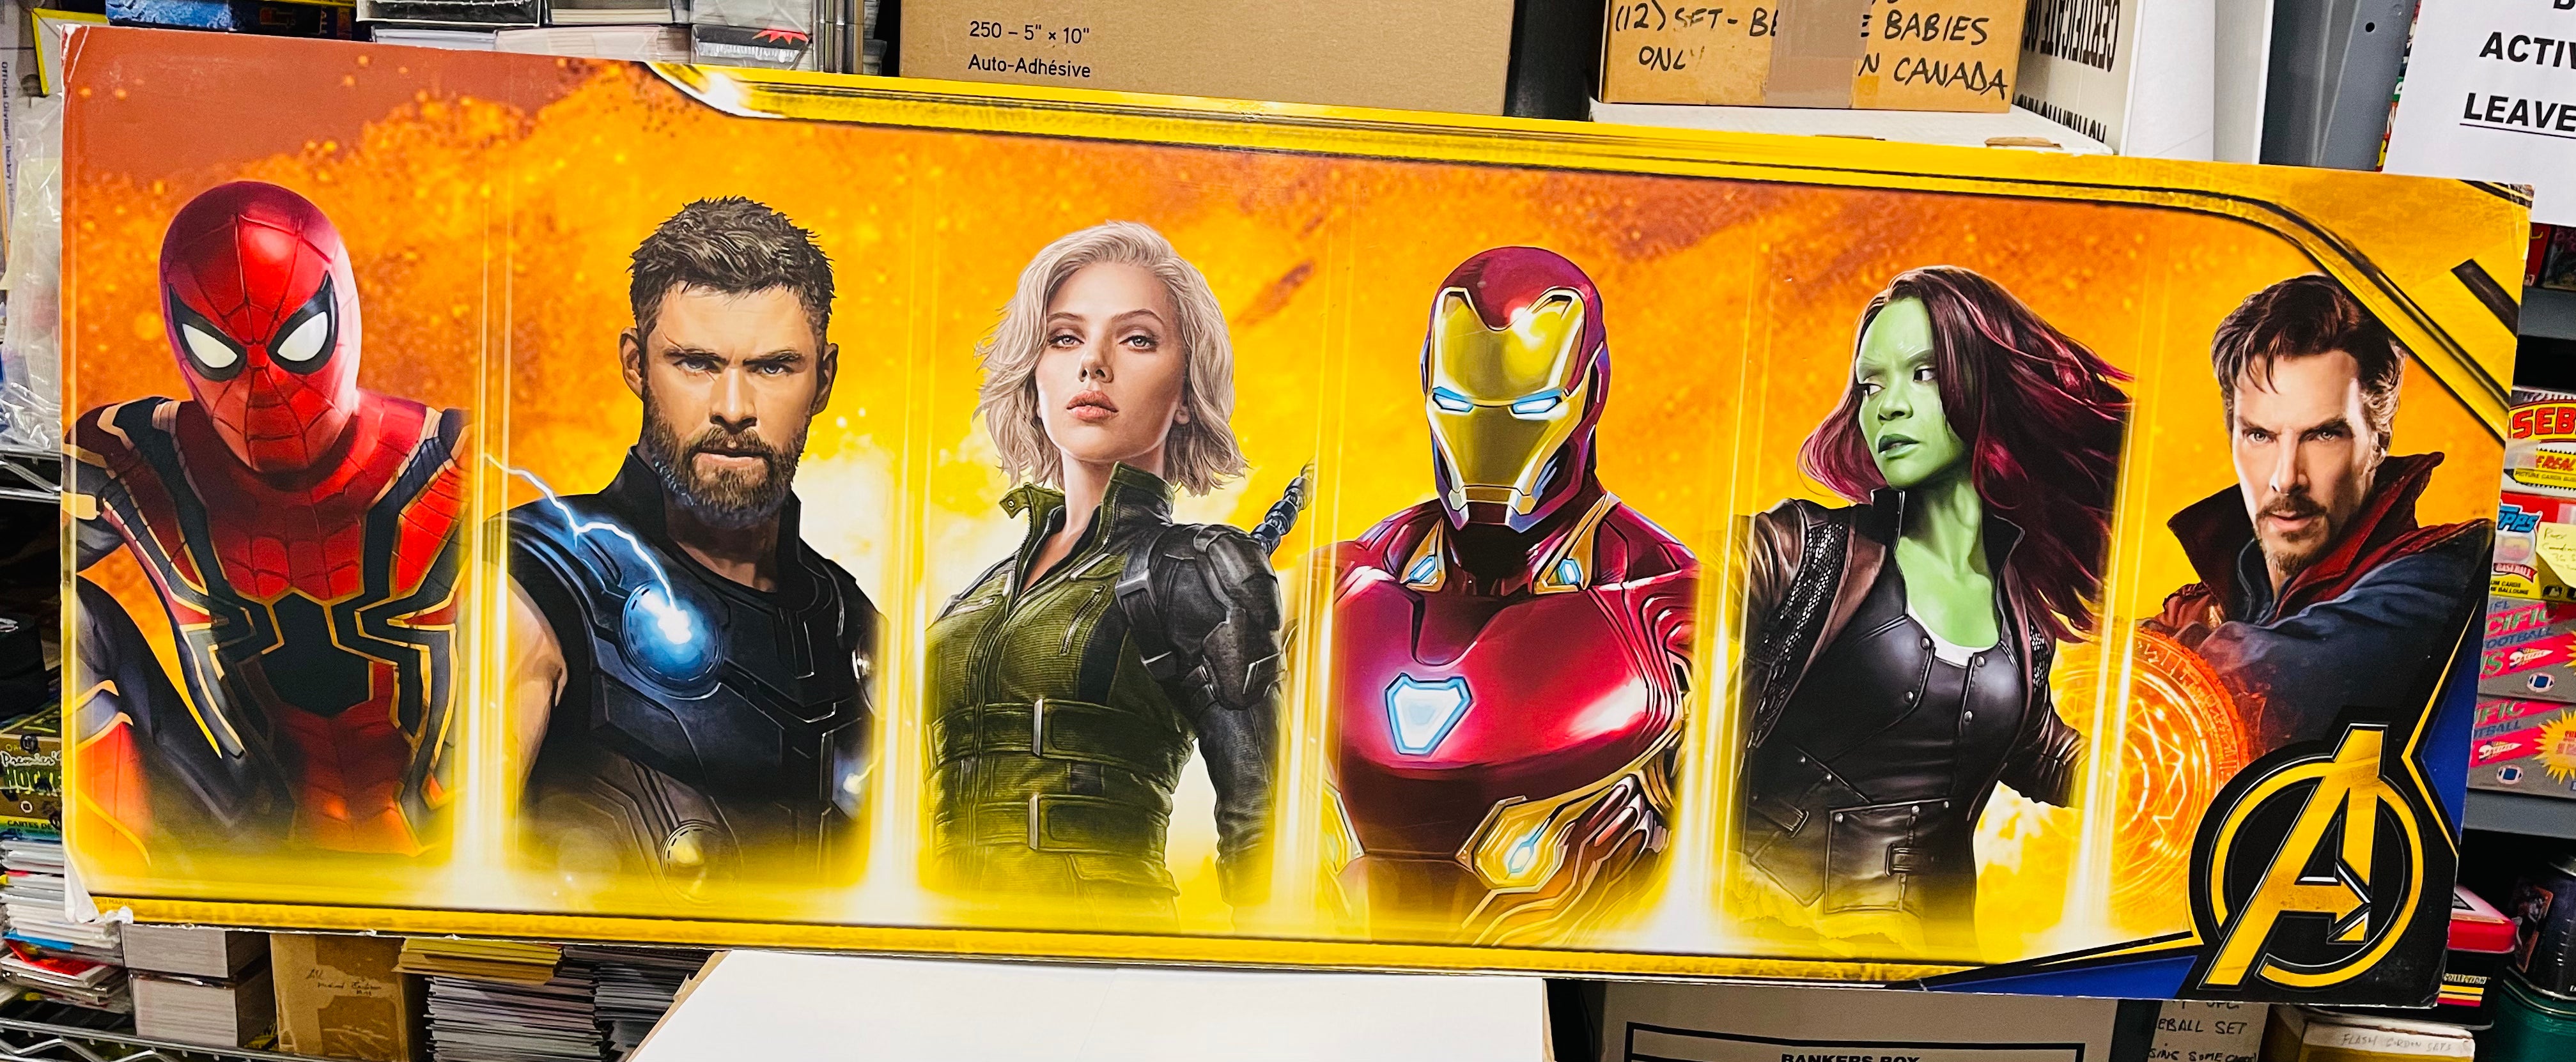 Marvel Avengers Infinity War movie special large 17x47 display cardboard poster